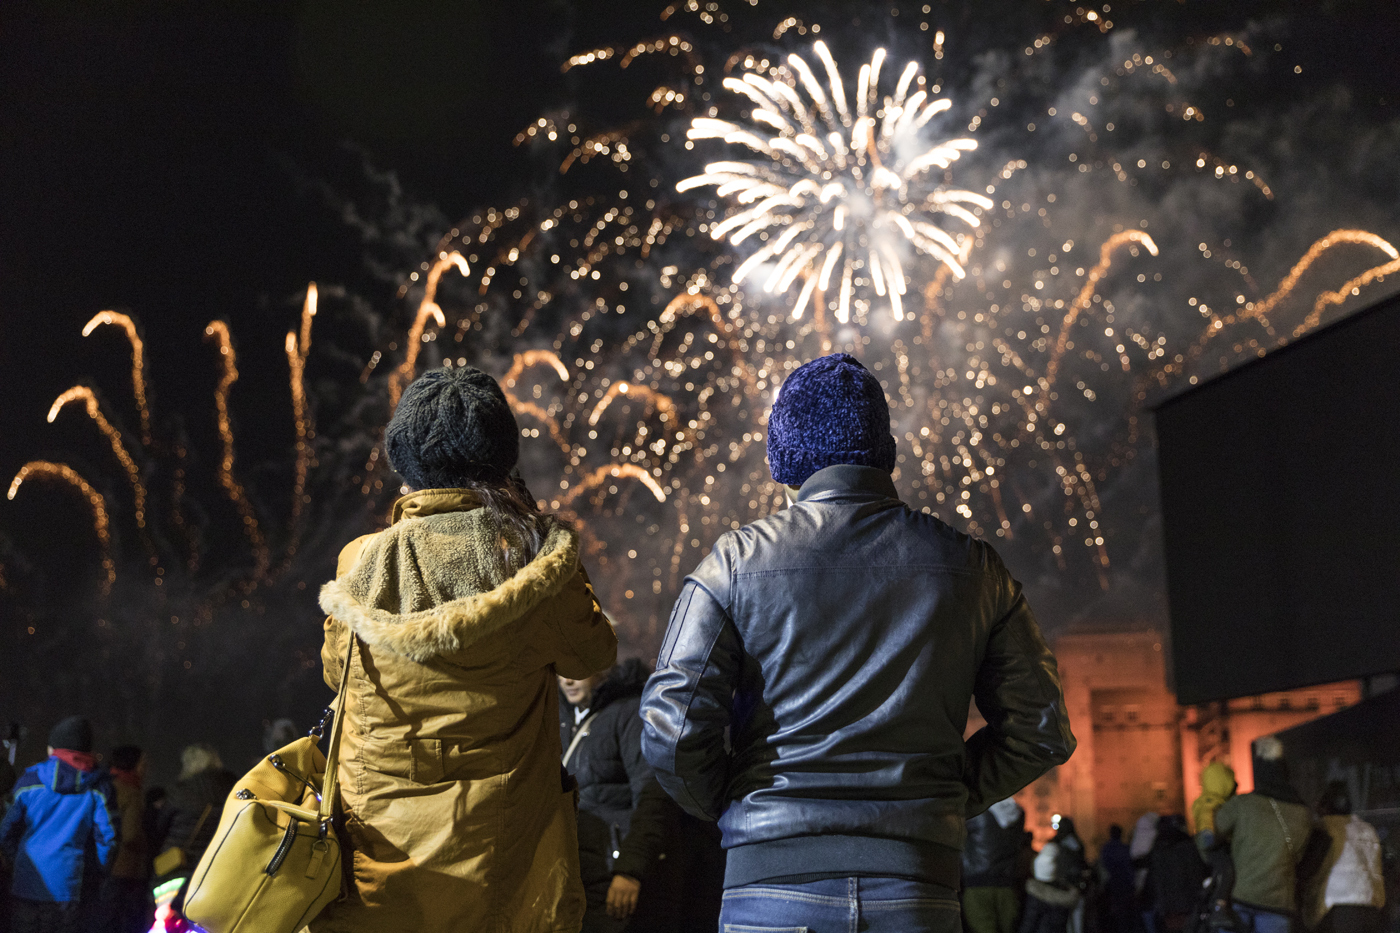 Two people with their backs to the camera watching fireworks